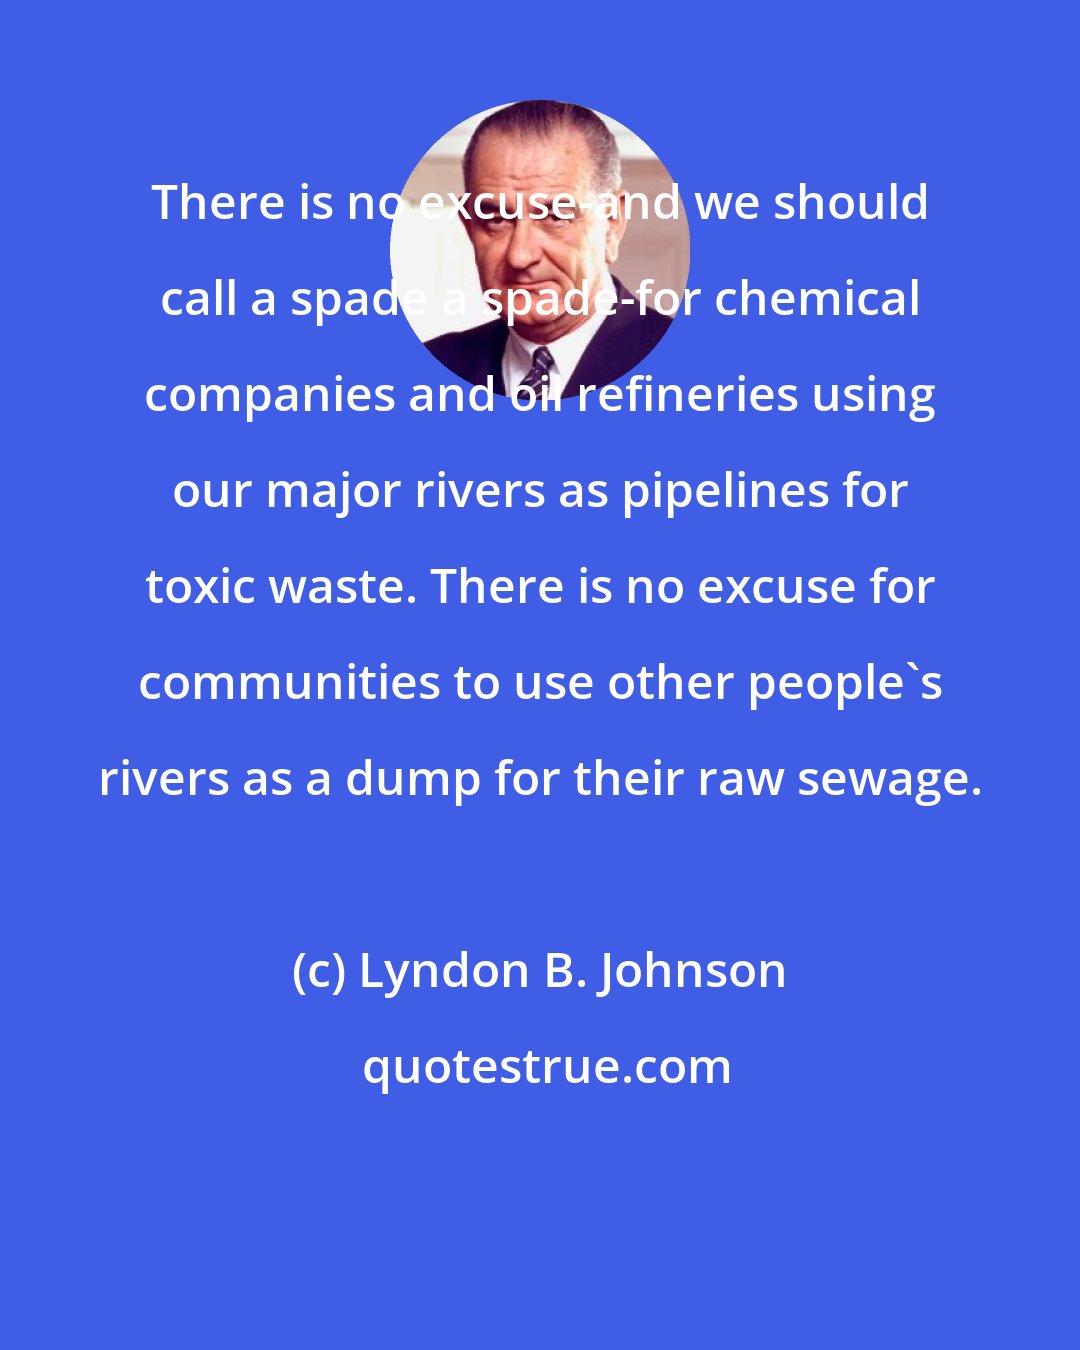 Lyndon B. Johnson: There is no excuse-and we should call a spade a spade-for chemical companies and oil refineries using our major rivers as pipelines for toxic waste. There is no excuse for communities to use other people's rivers as a dump for their raw sewage.